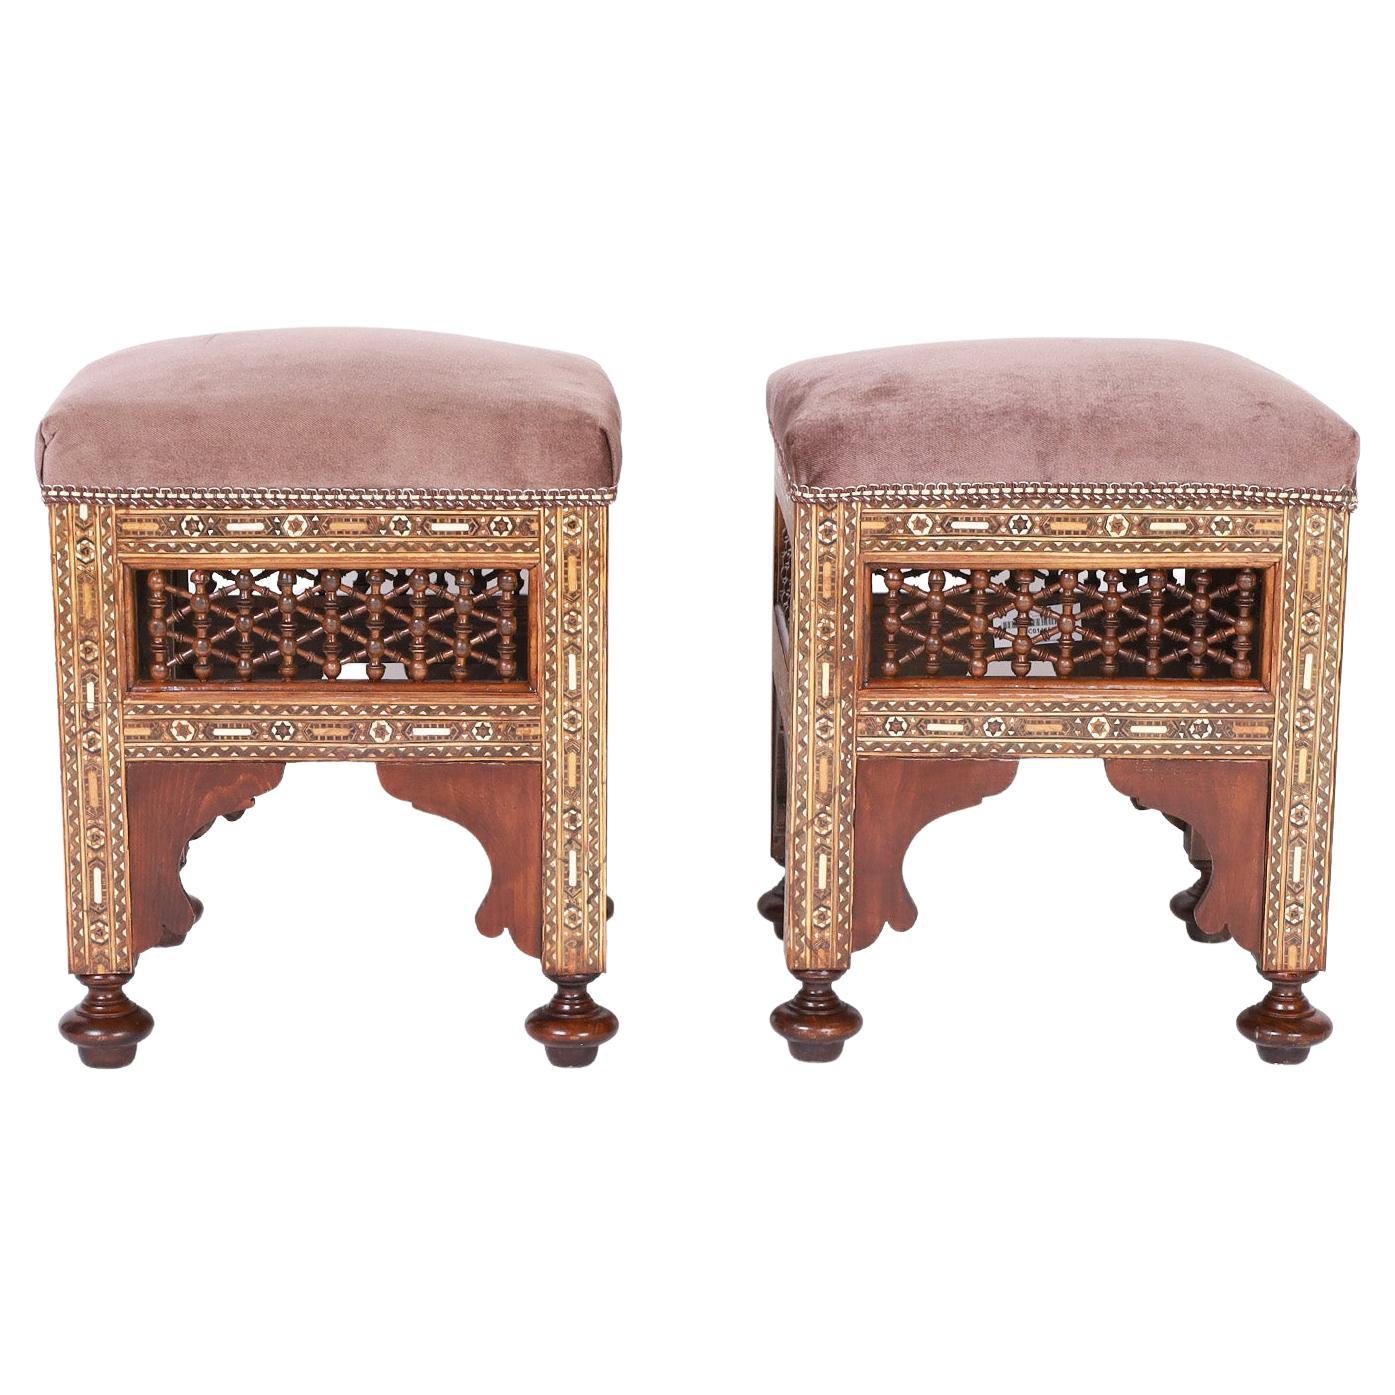 Pair of Moroccan Inlaid Benches or Stools